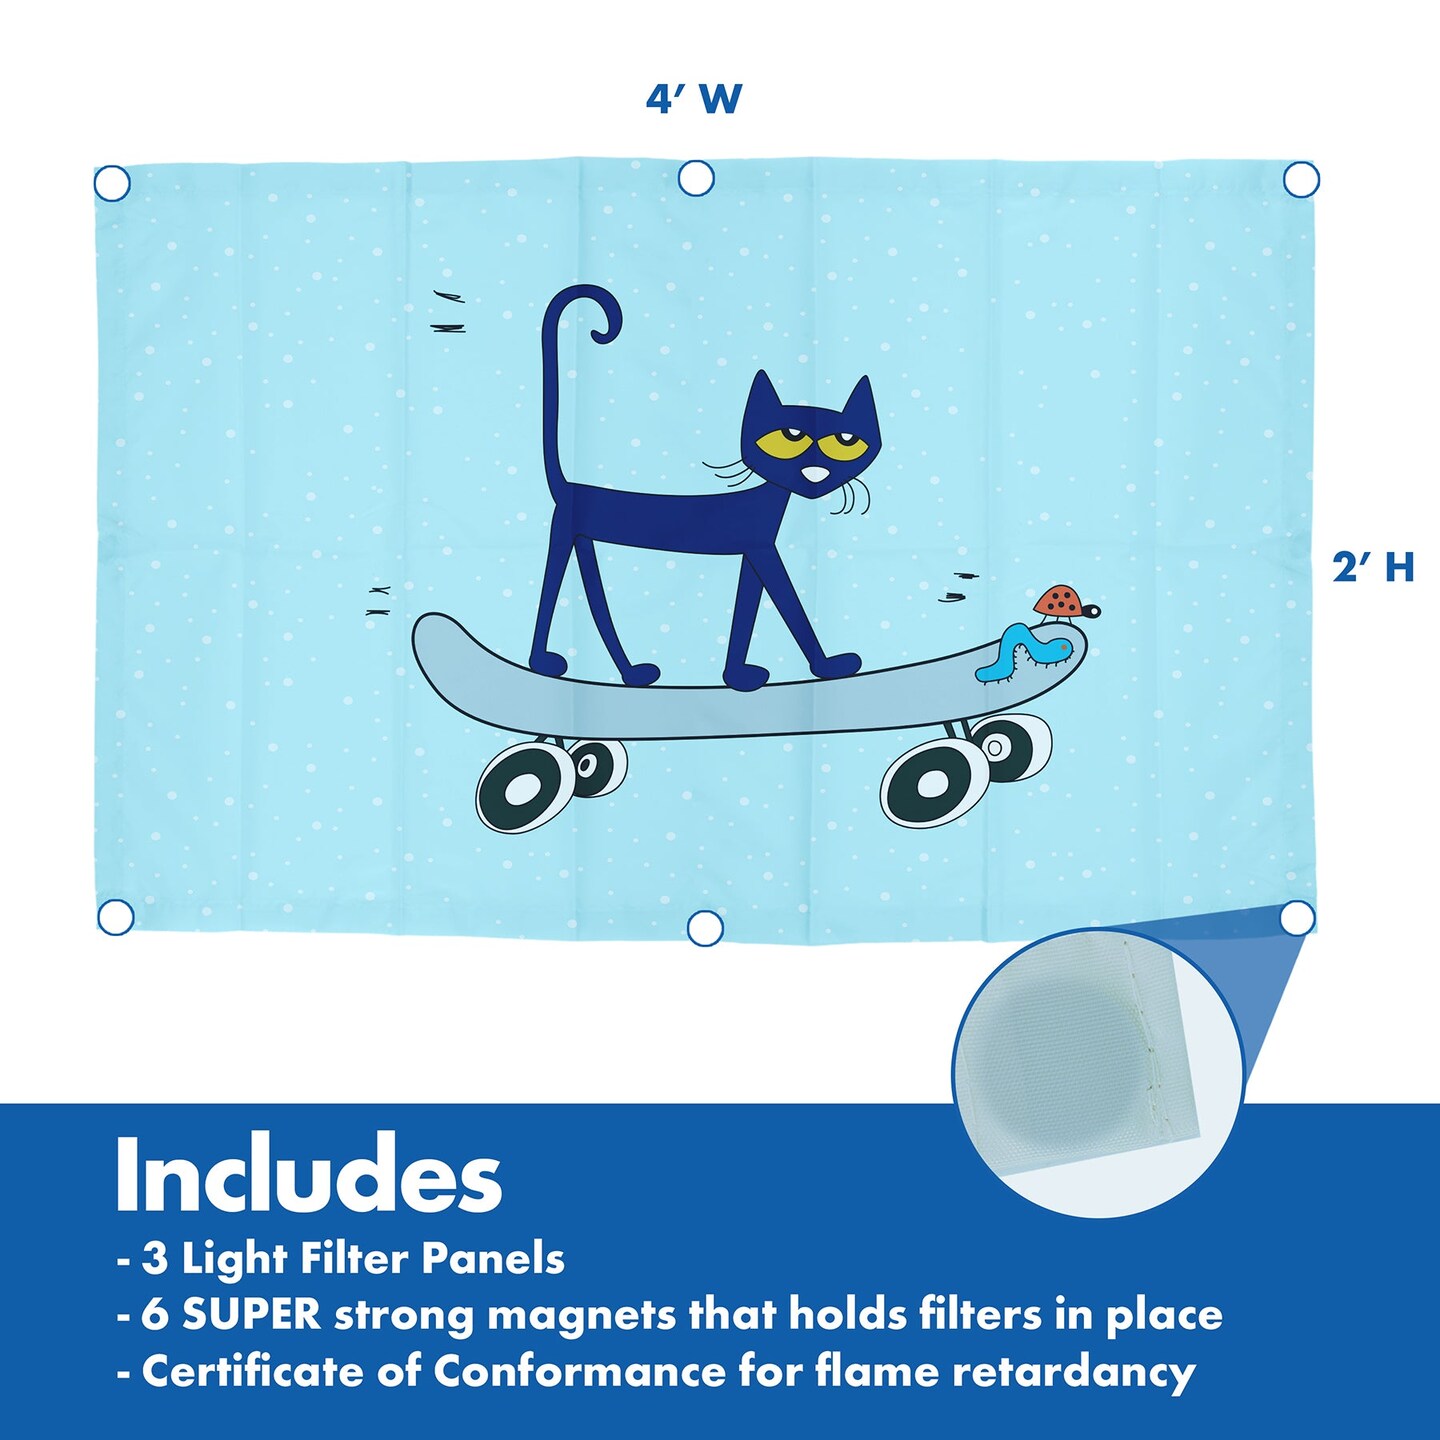 Pete the Cat&#xAE; Calming Light Filters, Pack of 3